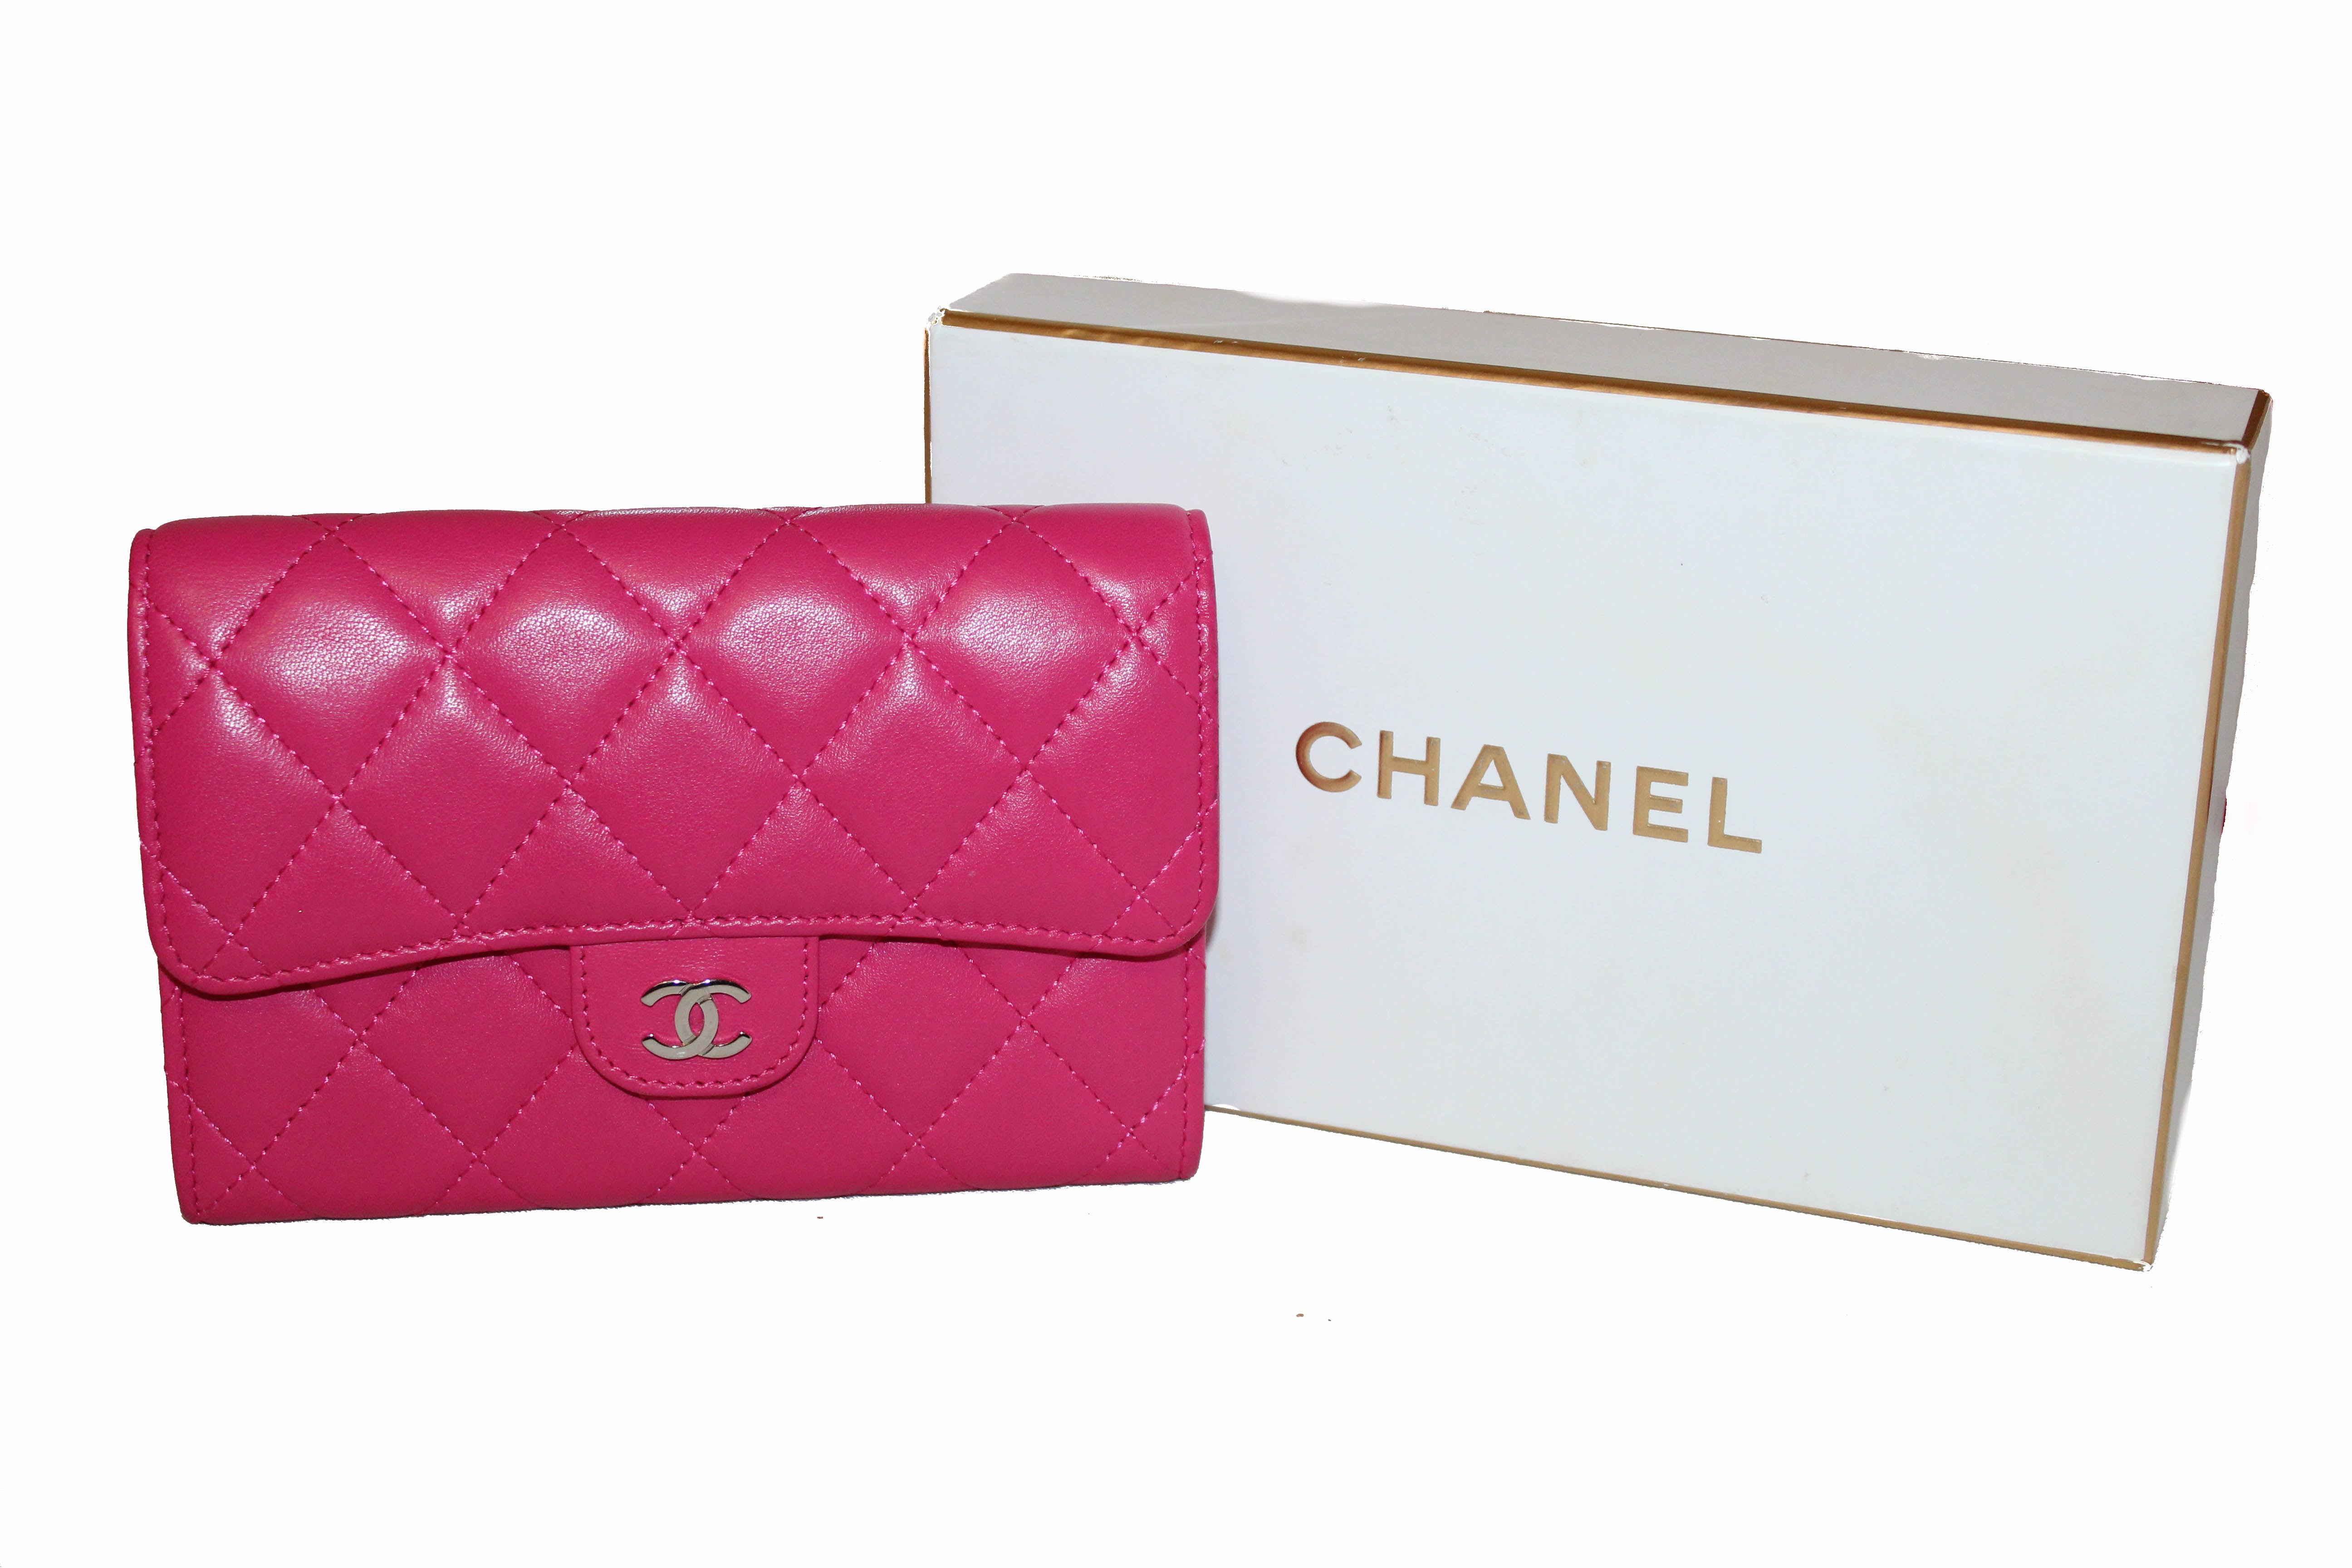 Authentic Chanel Pink Quilted Lambskin Leather Classic Flap Wallet